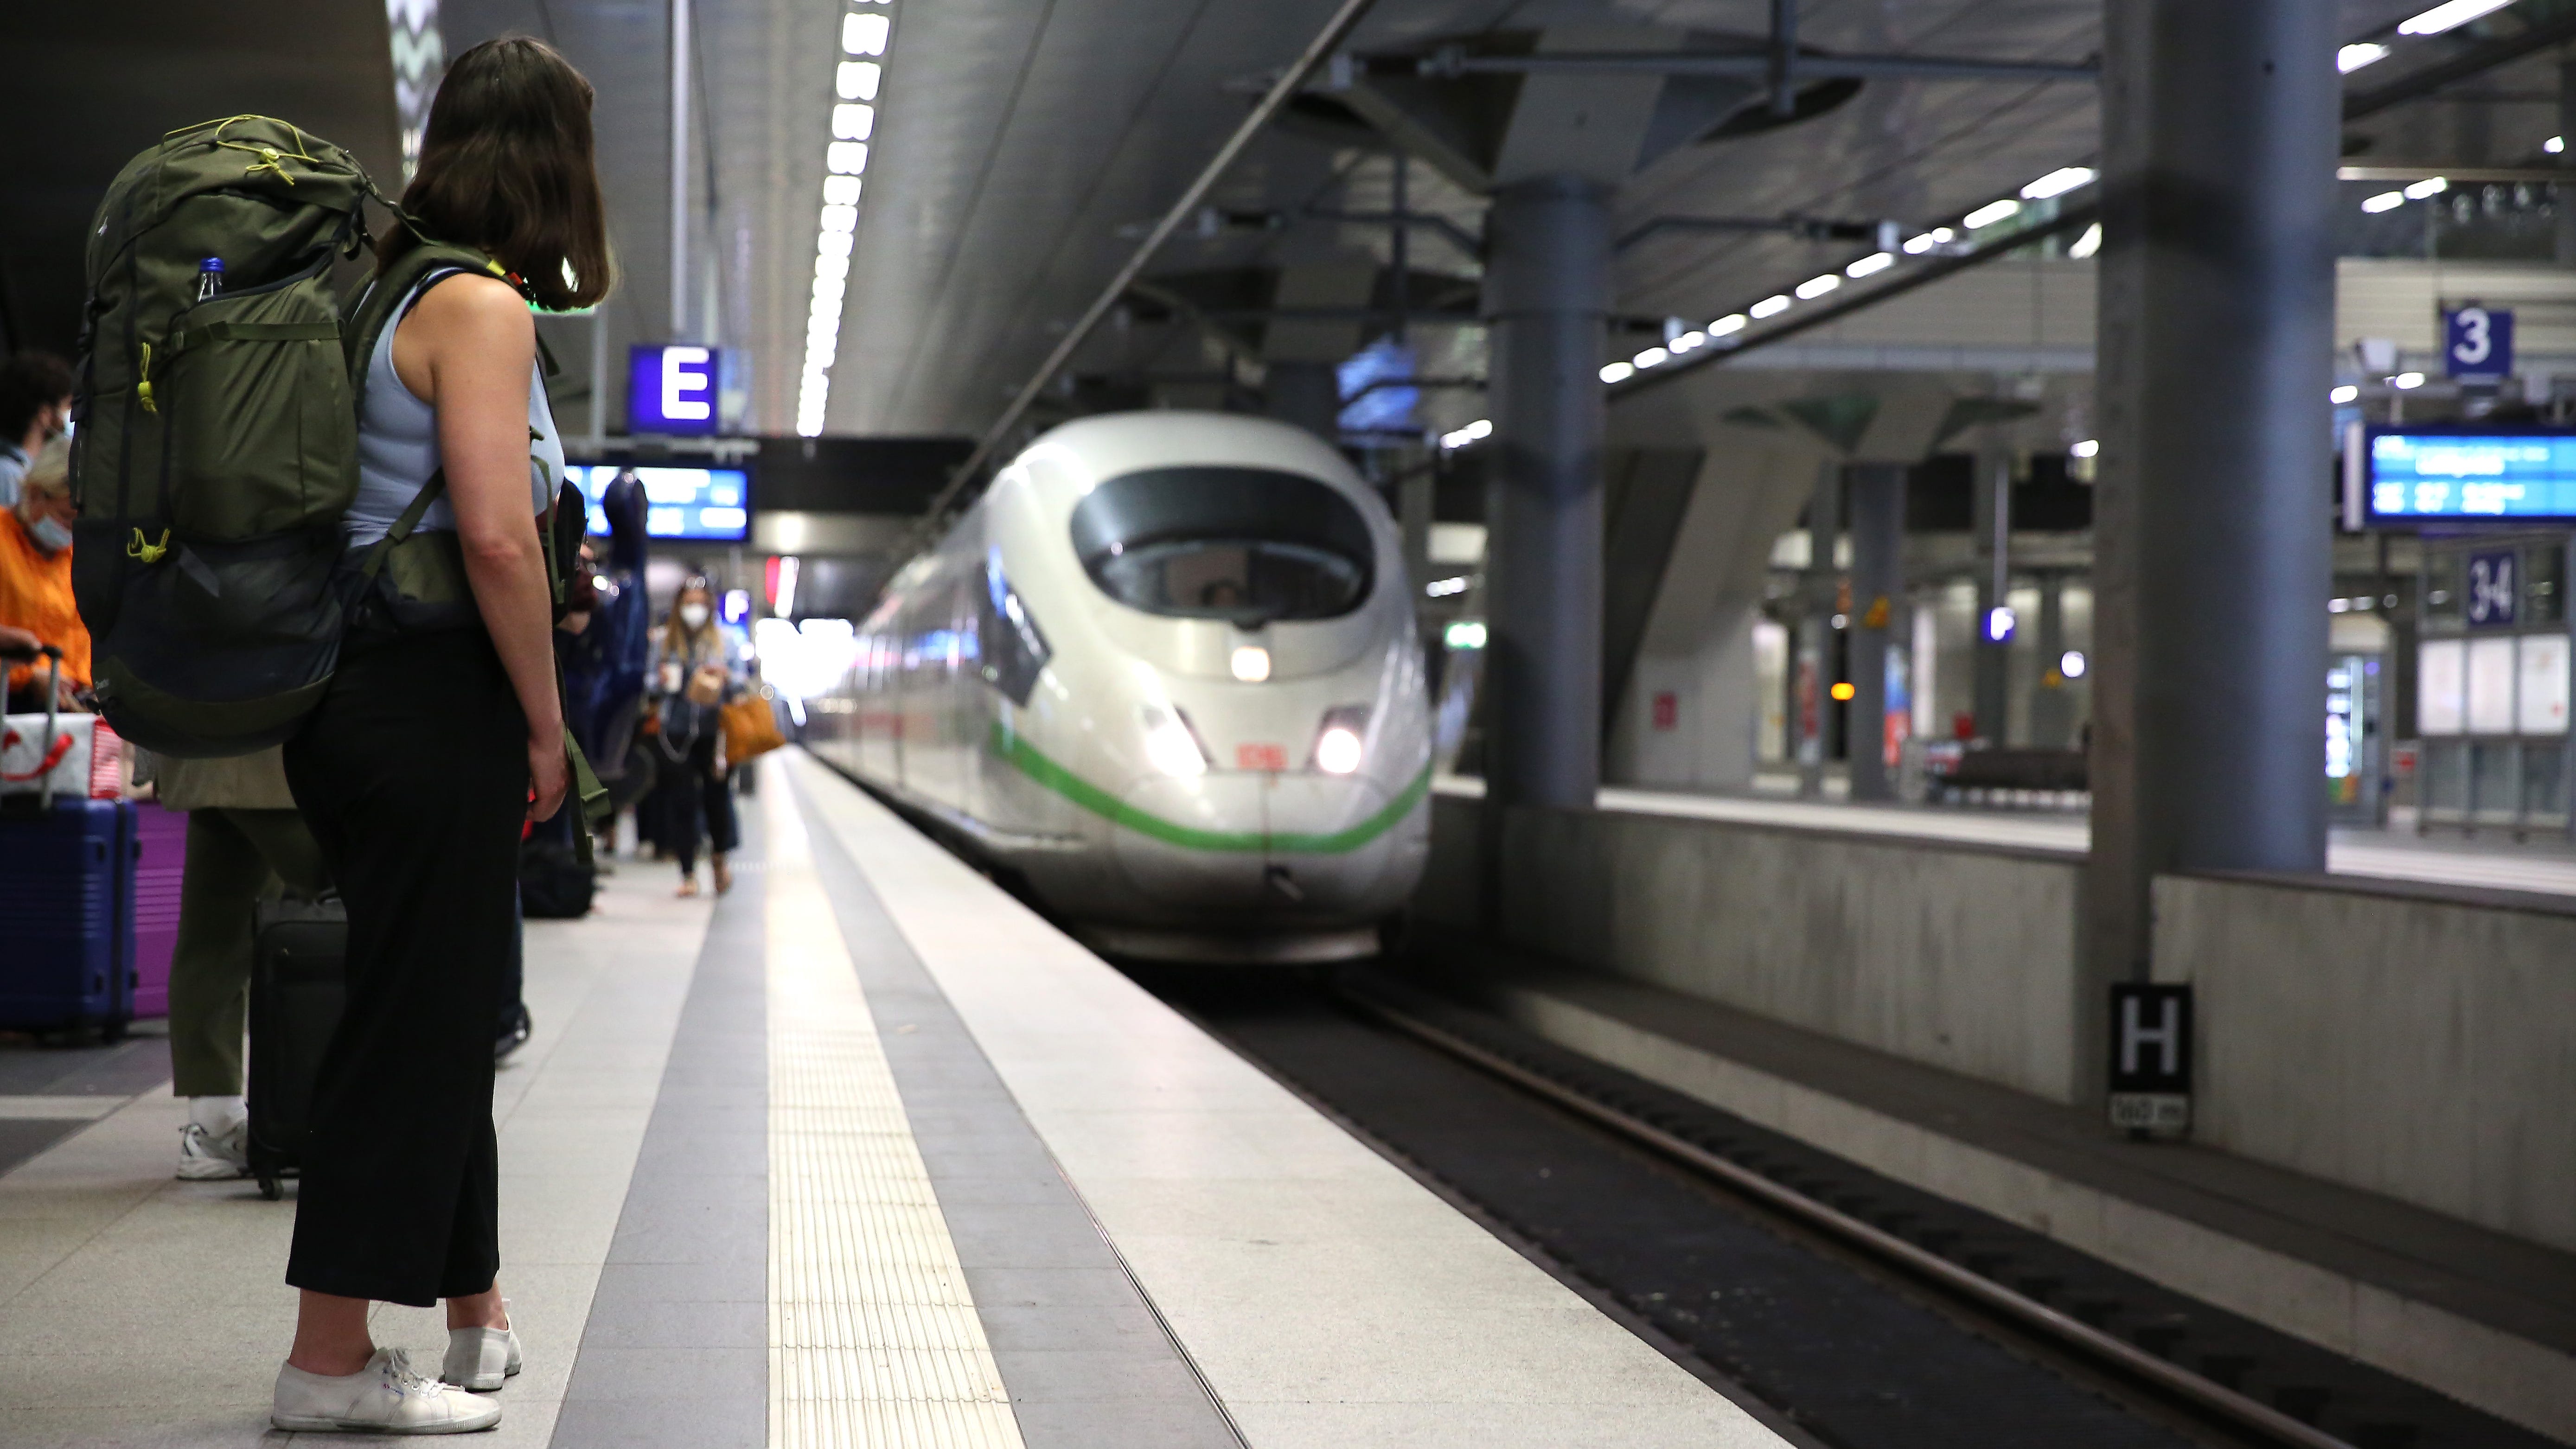 A passenger looks on as a high-speed train approaches at Berlin's main train station on August 10, 2021. Starting Sunday, unvaccinated travelers to Germany who have been in the U.S. recently will need to quarantine at least five days.